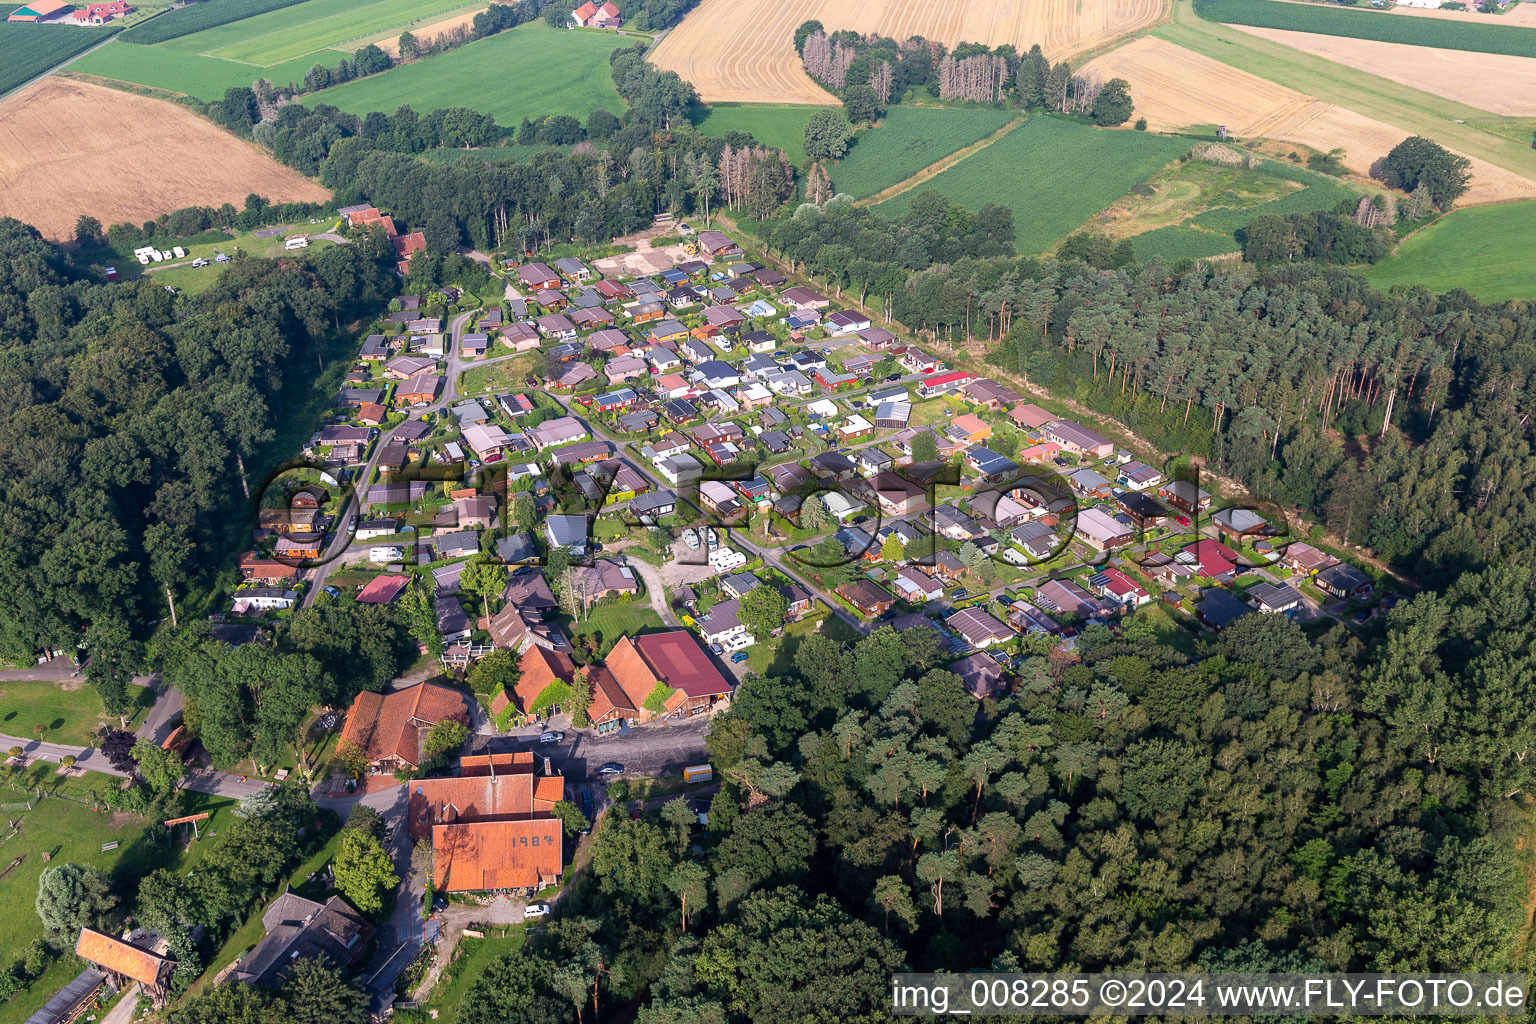 Aerial view of Holiday house plant of the park " Erholungsgebiet Waldvelen " in Velen in the state North Rhine-Westphalia, Germany